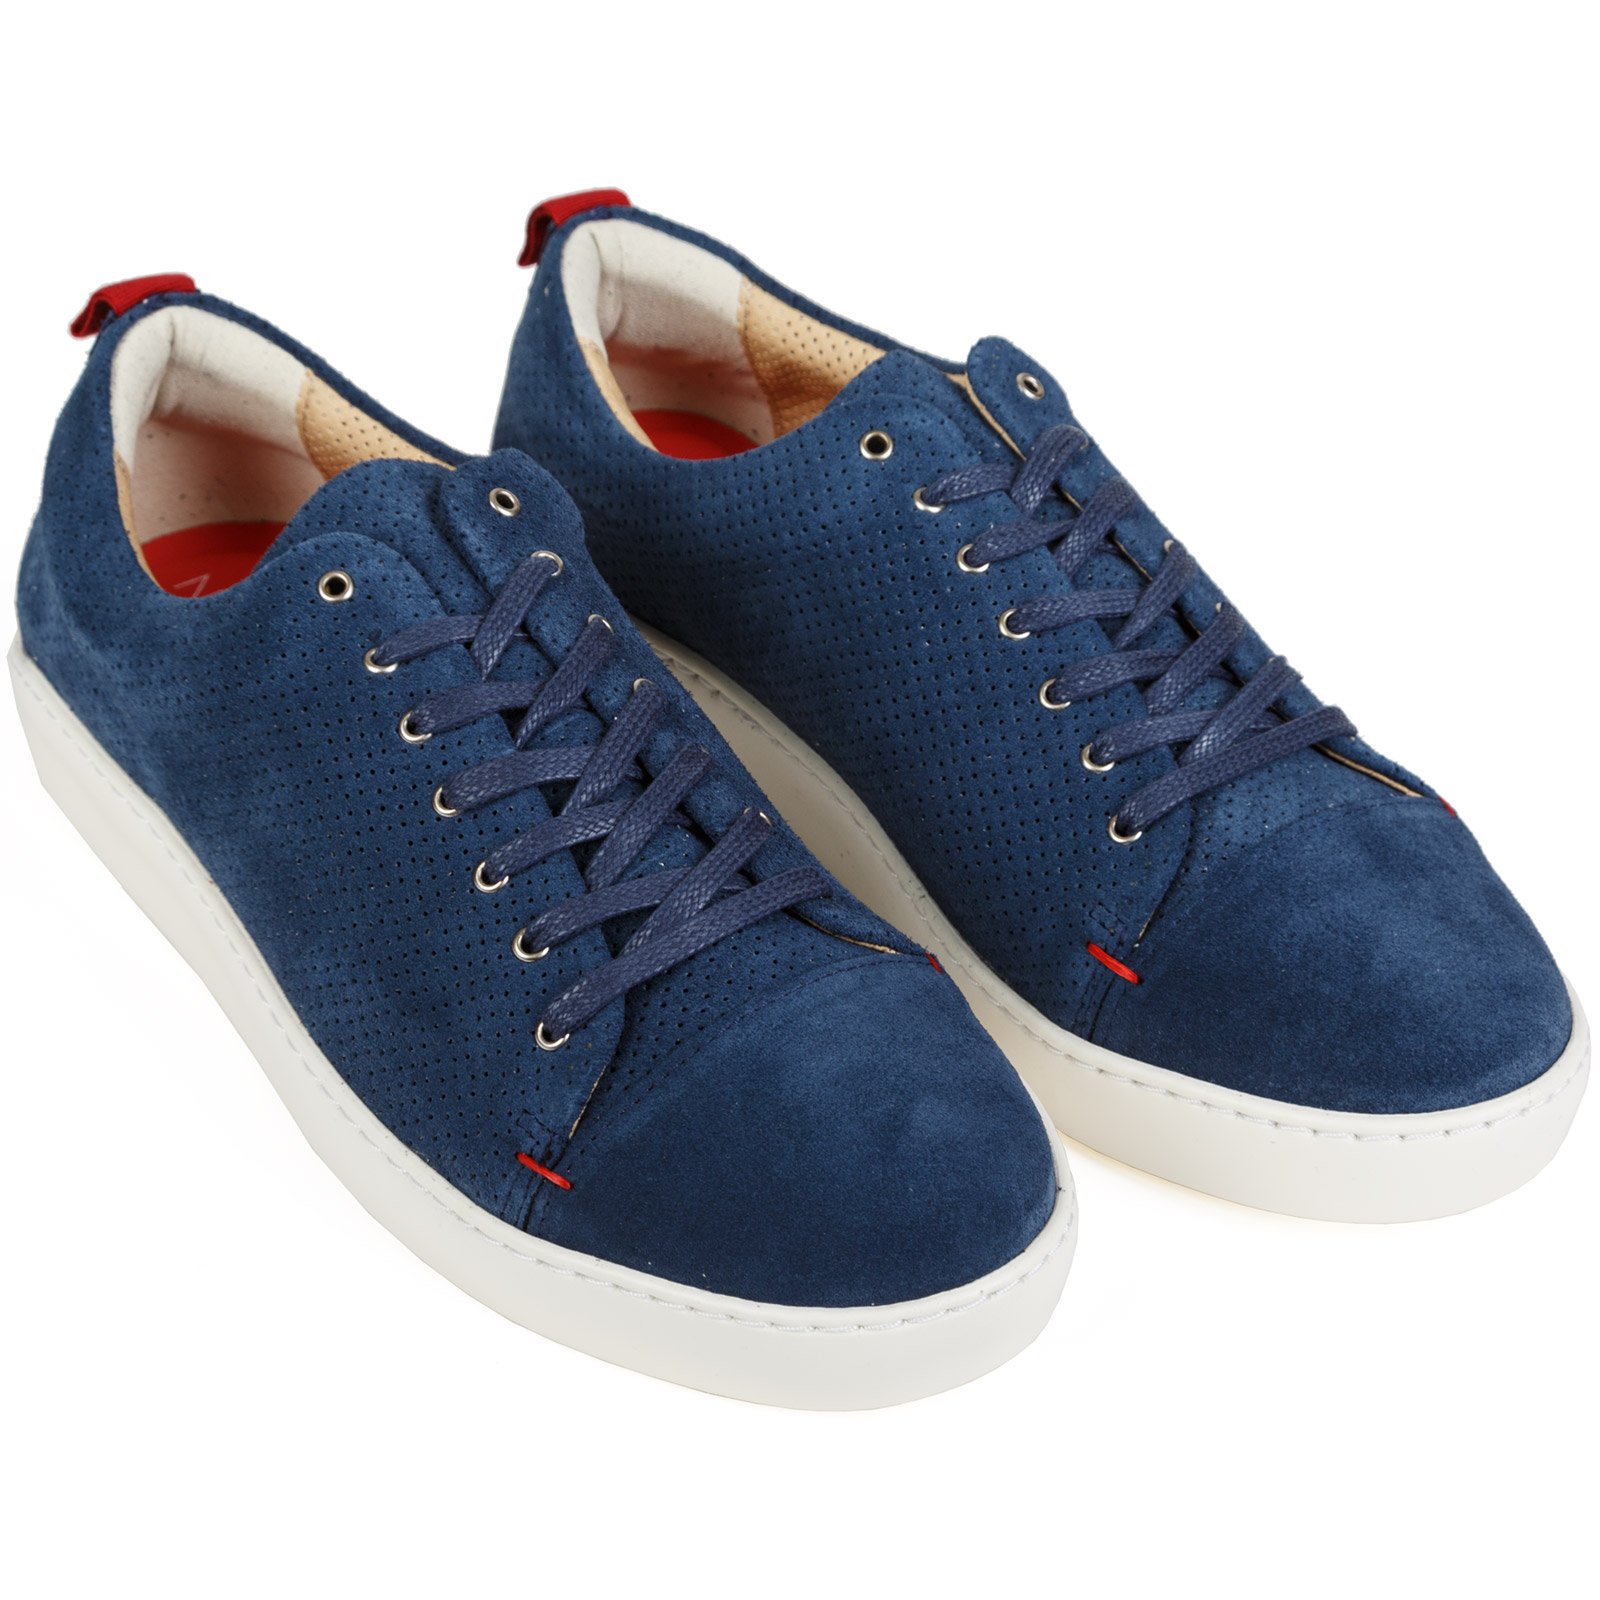 Art Punched Suede Sneaker - Shoes & Boots-Casual Shoes : Fifth Avenue ...